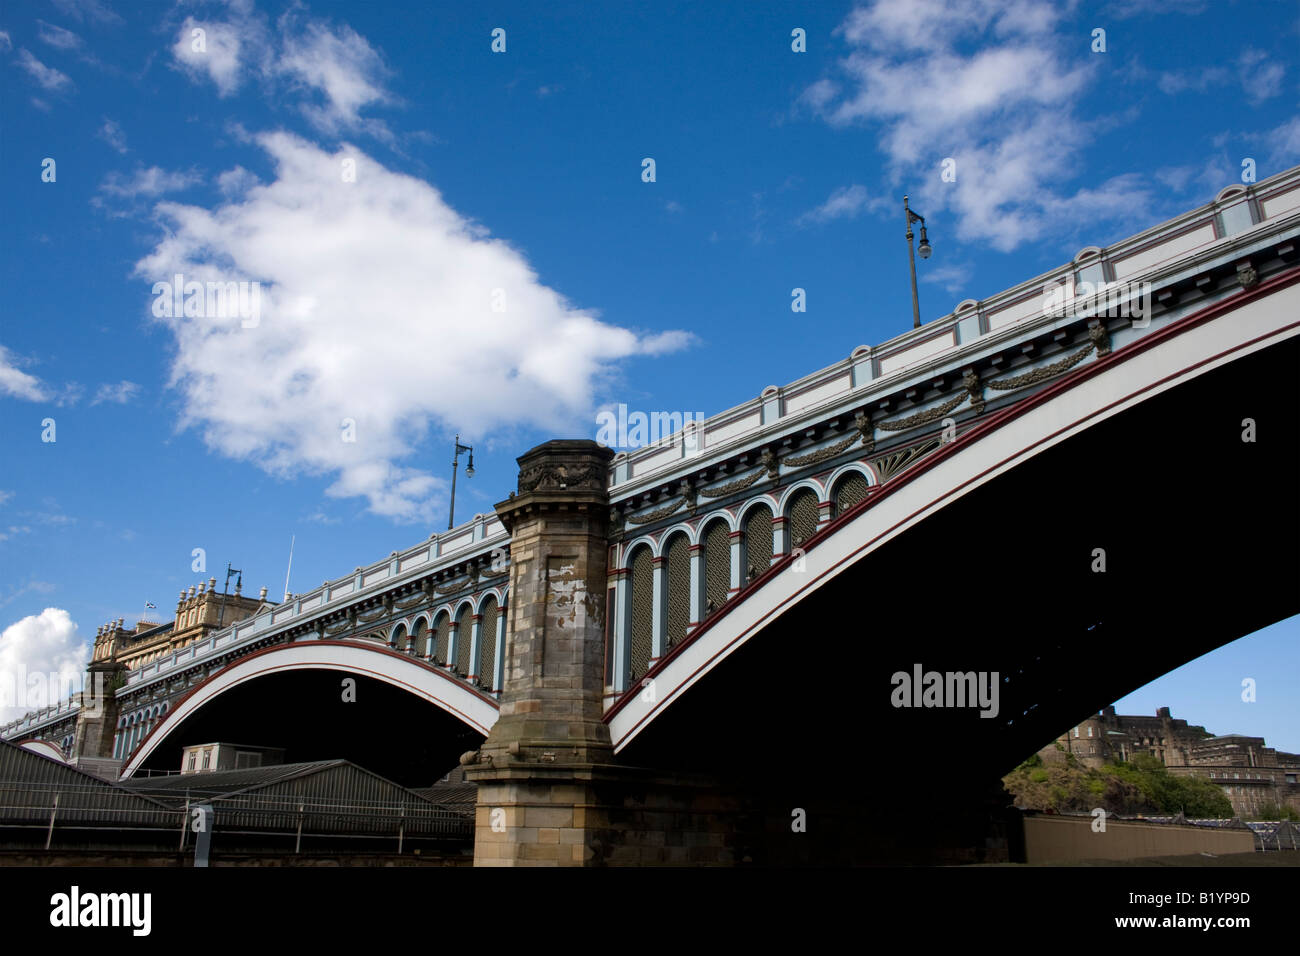 North Bridge in the city centre of Edinburgh over the railway and Waverley street station with The Royal Observatory, Edinburgh Stock Photo